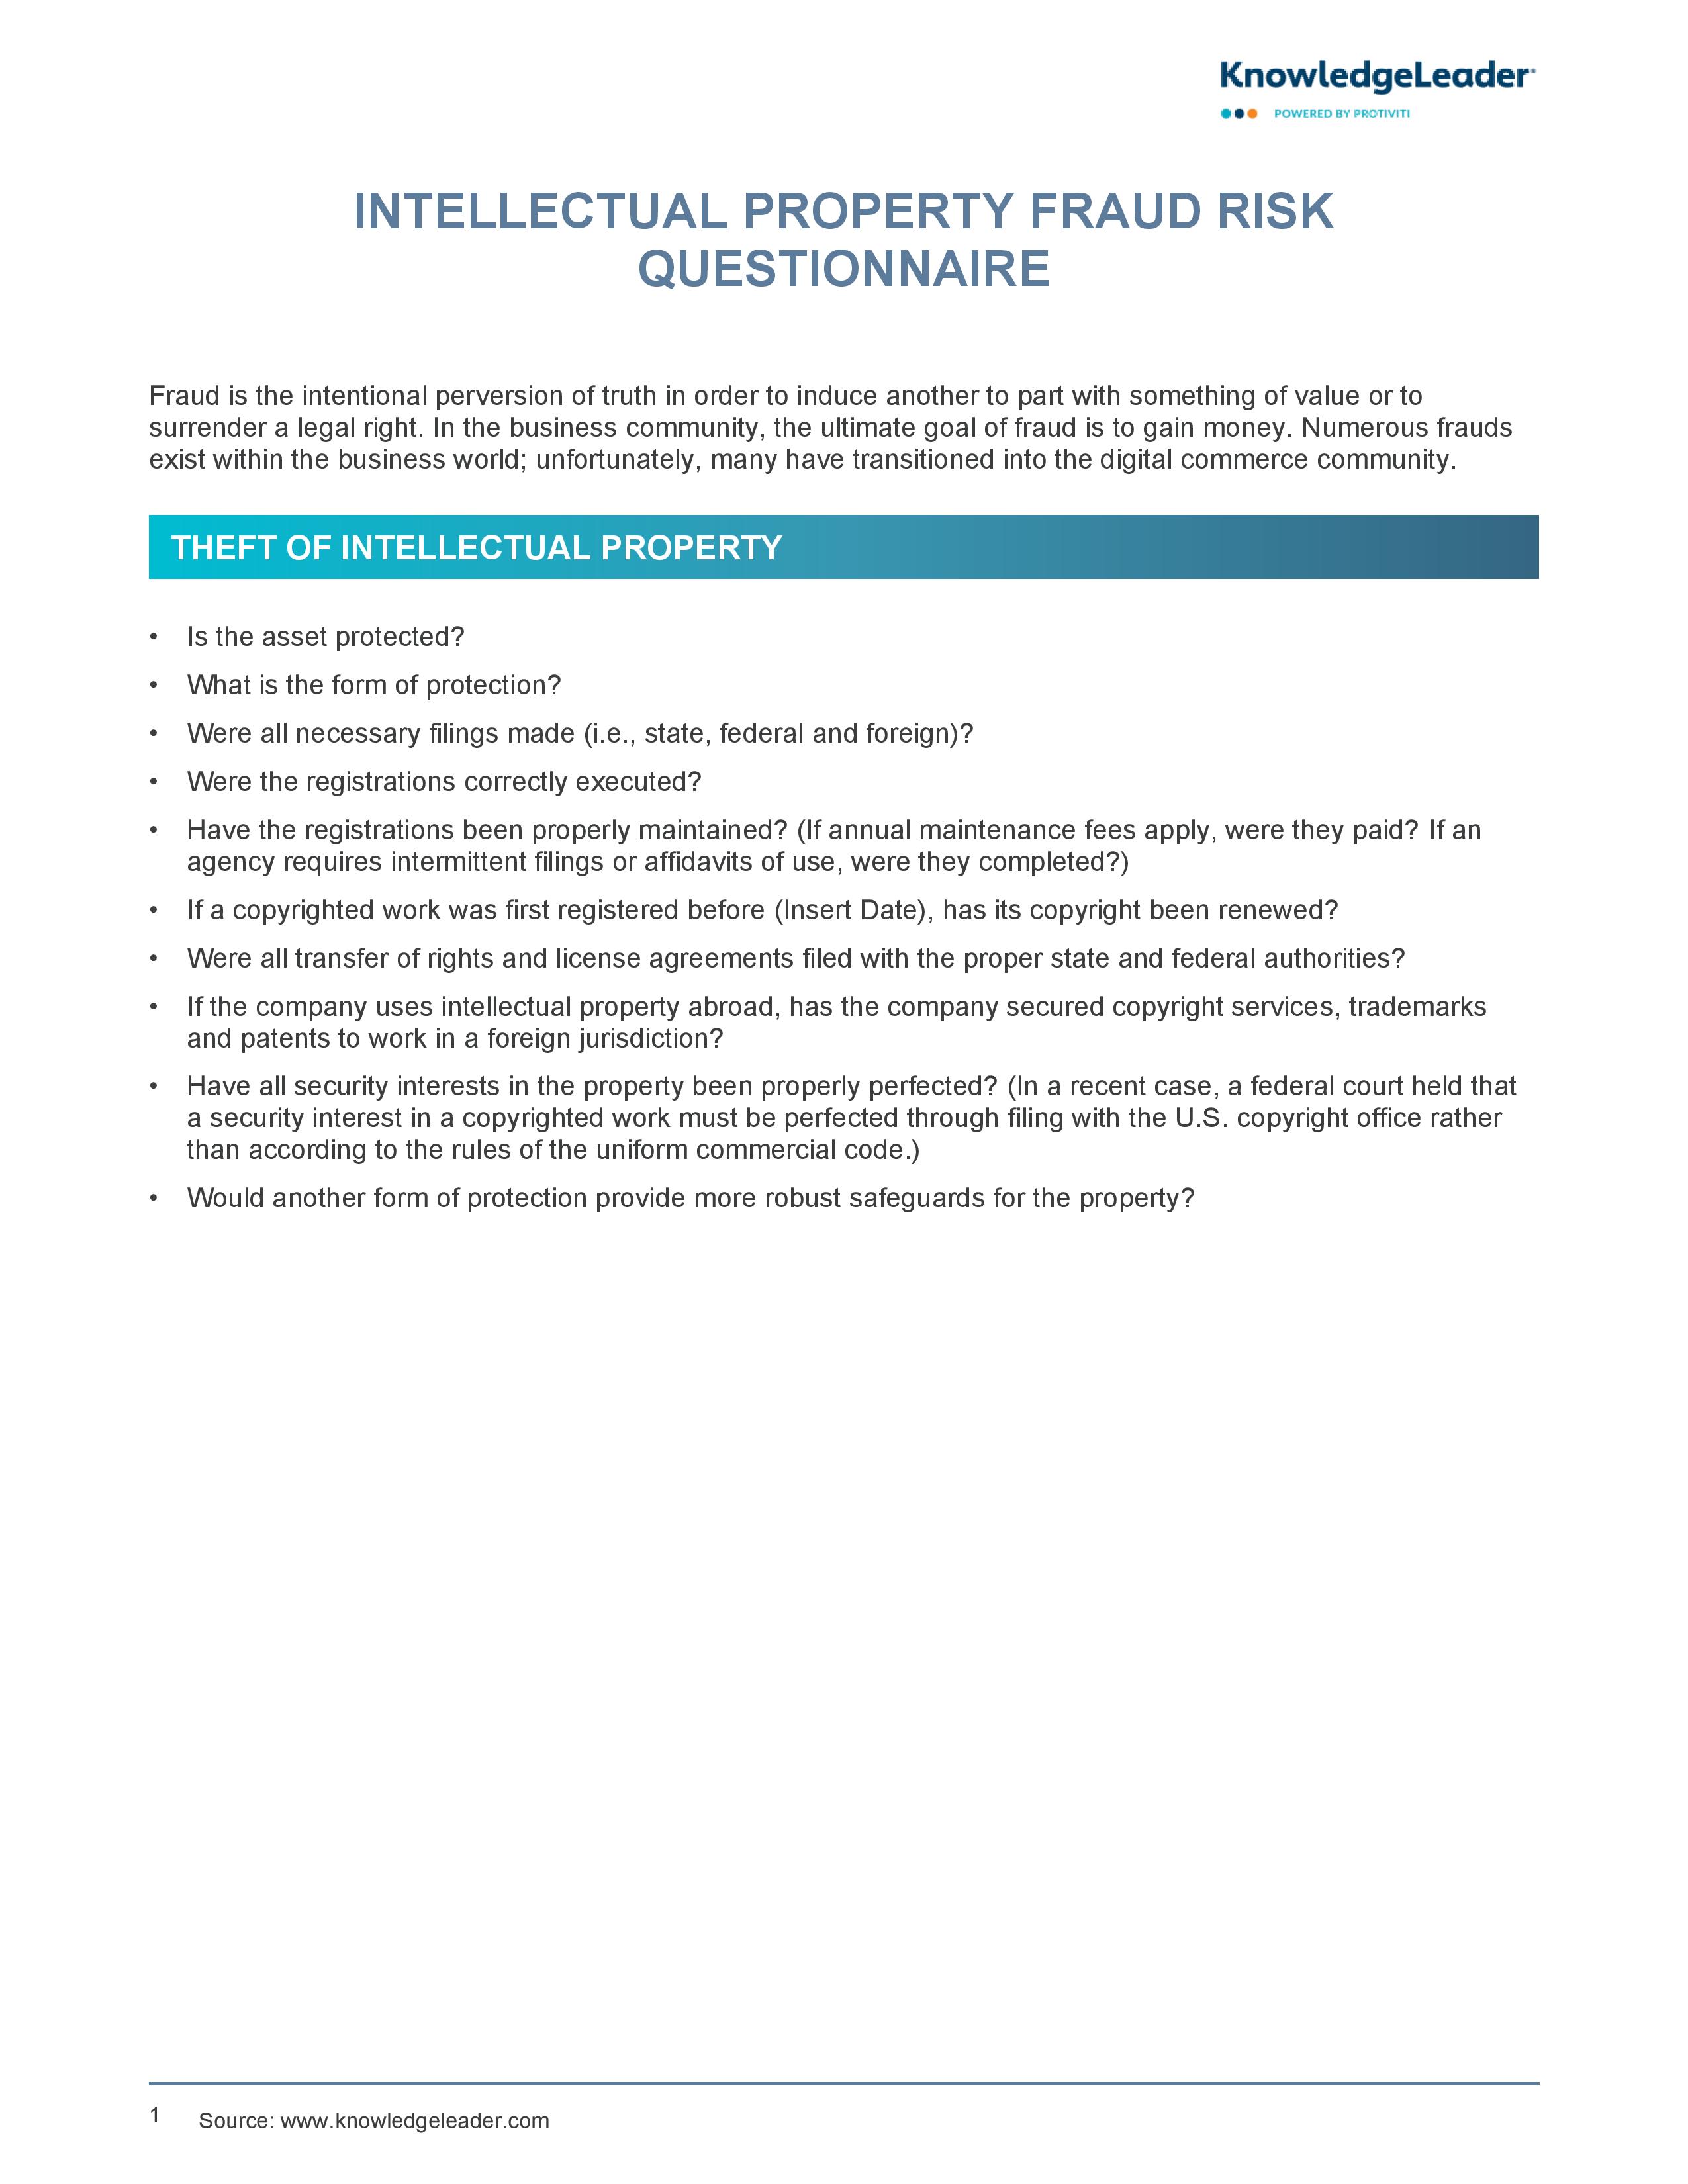 Screenshot of the first page of Intellectual Property Fraud Risk Questionnaire